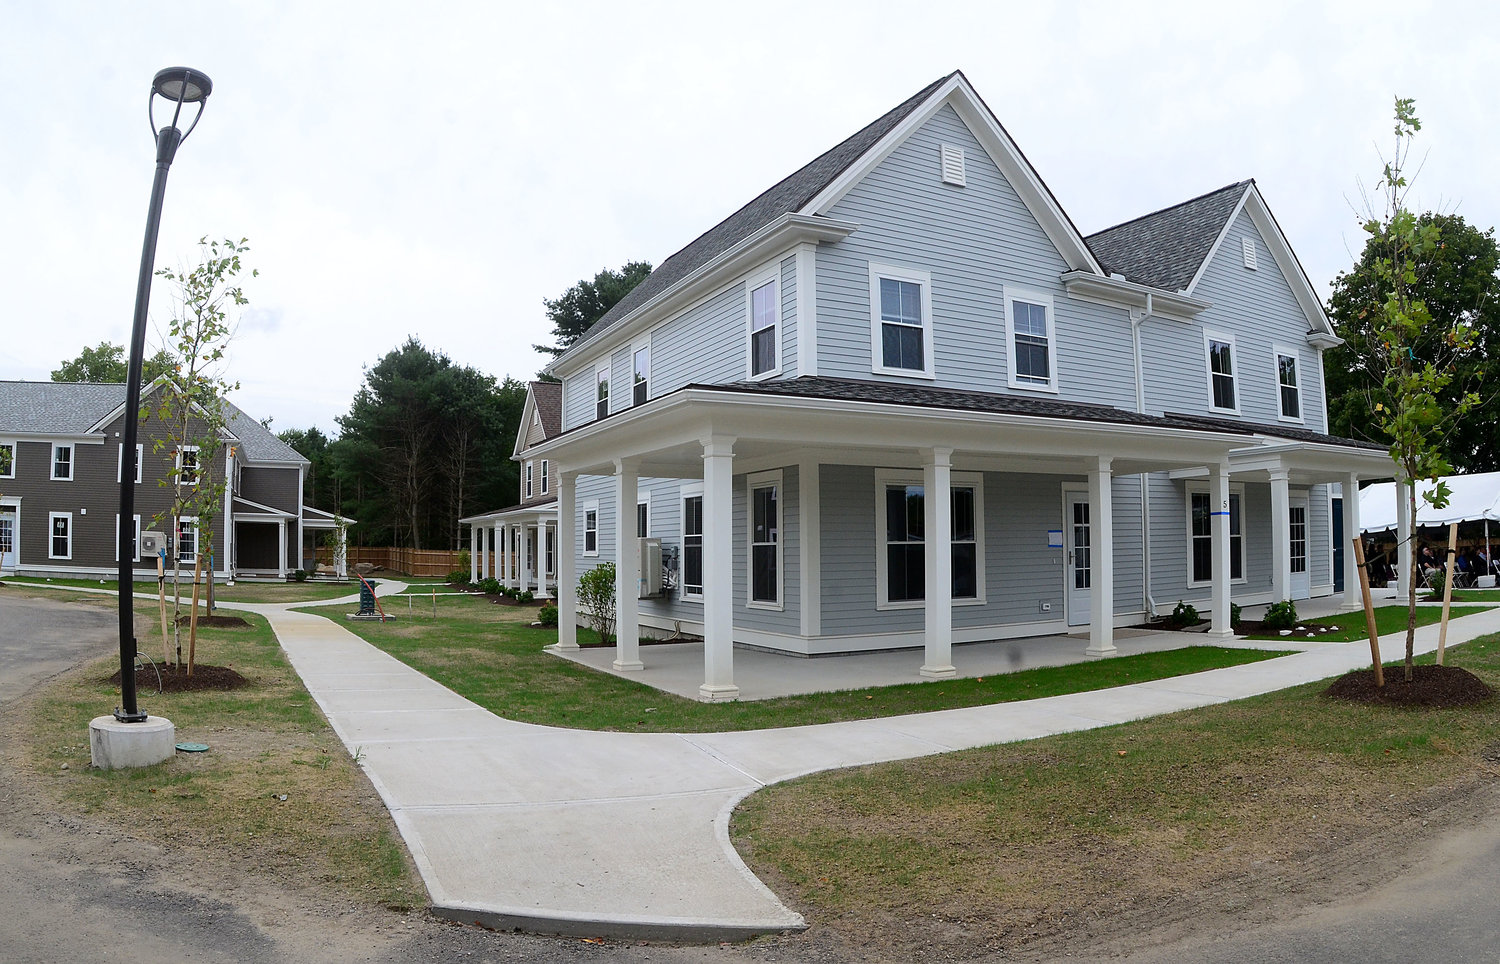 The Barrington Town Council recently created a revolving fund to support affordable housing in town and started it with $500,000.